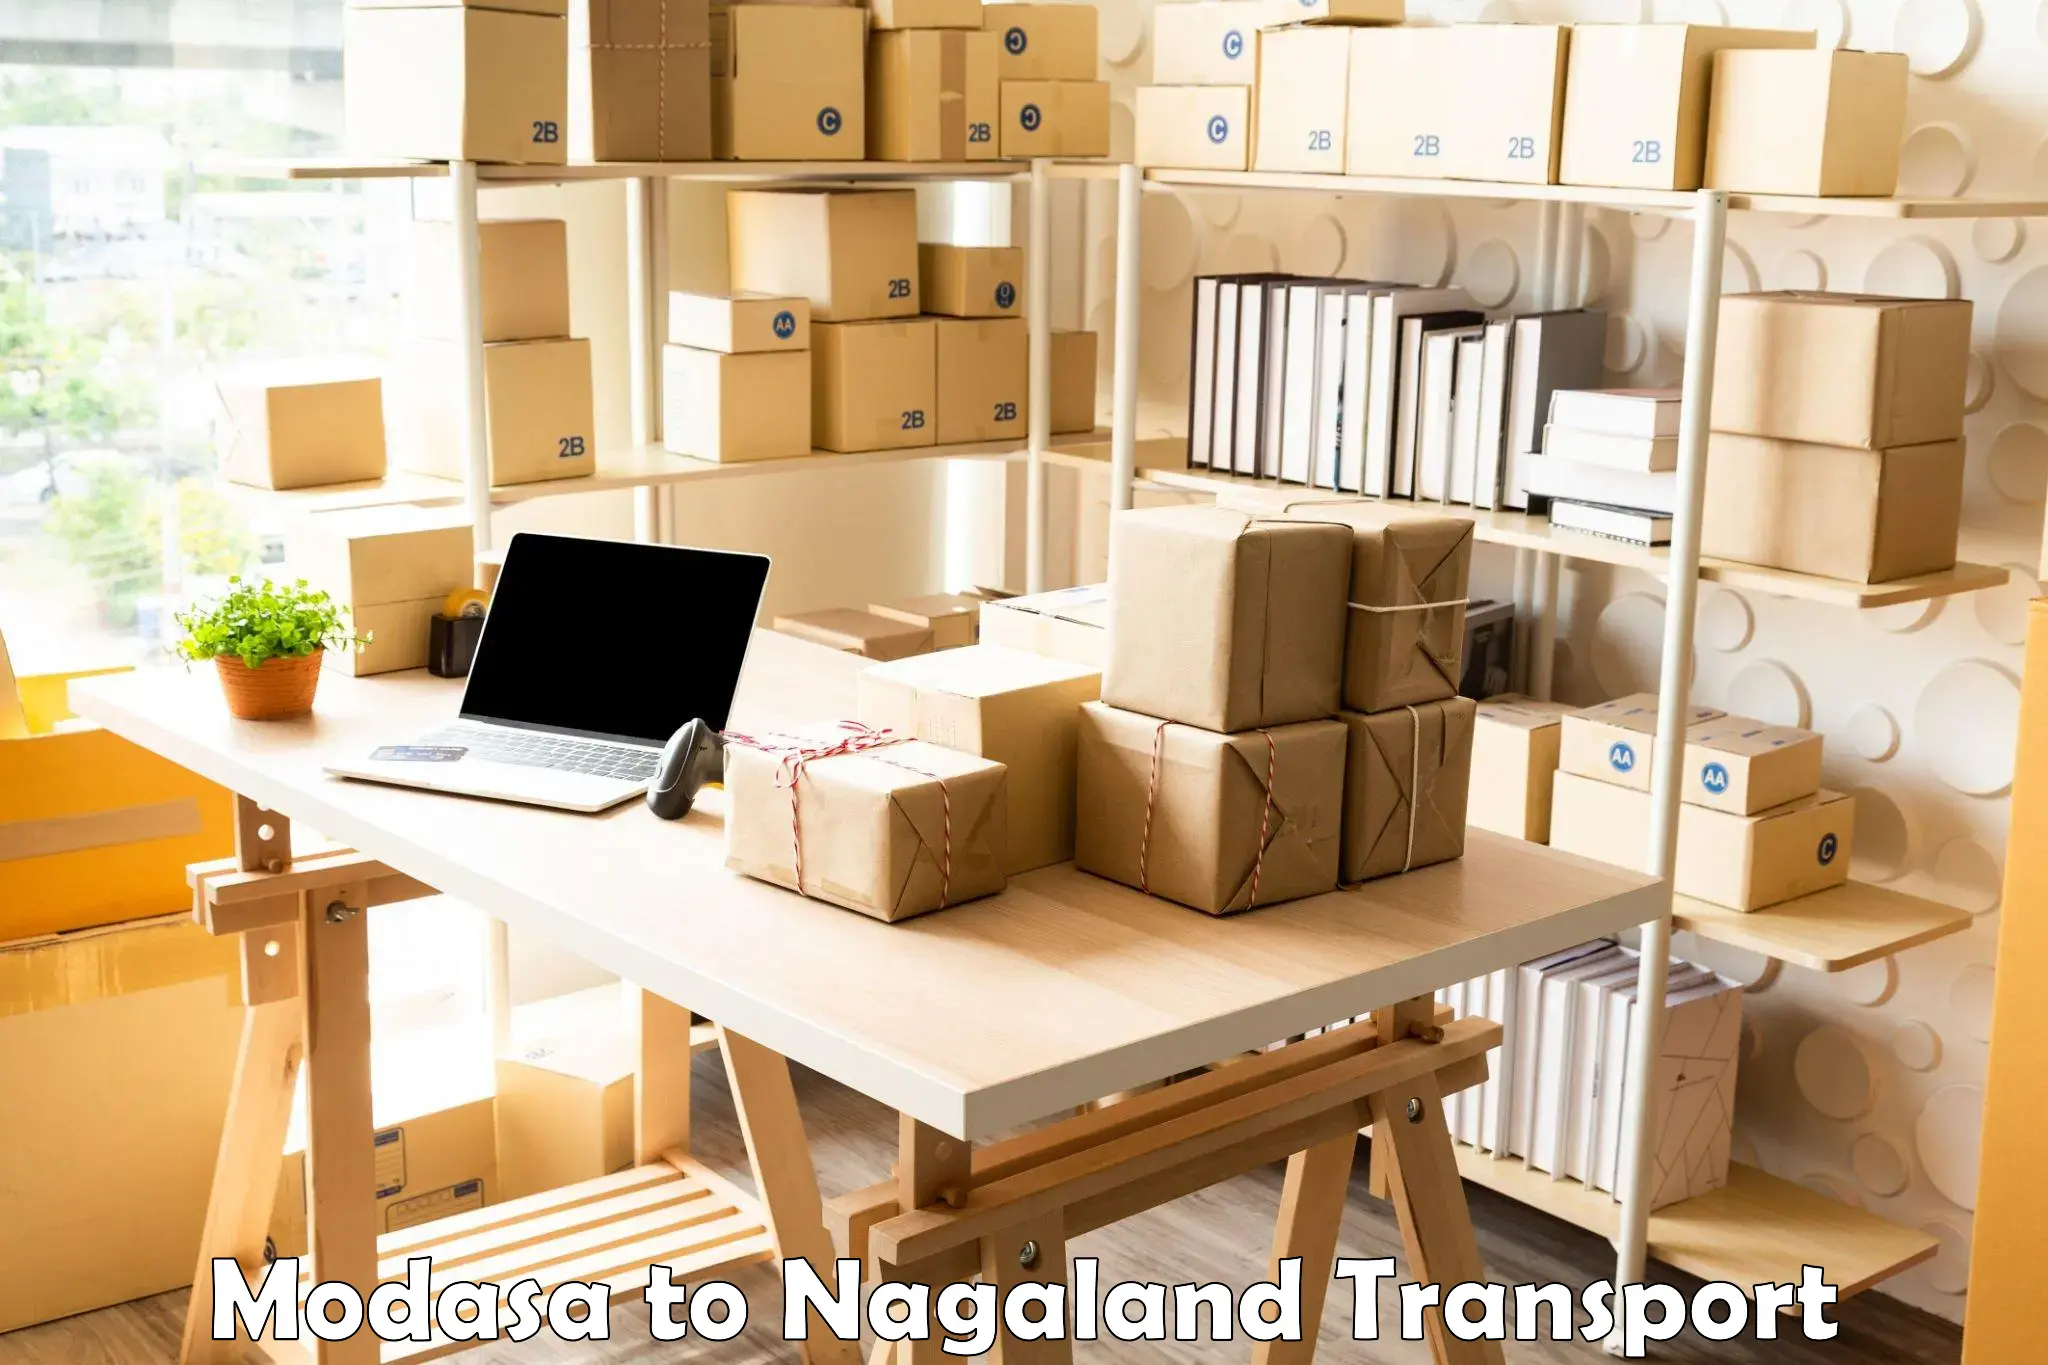 Vehicle transport services in Modasa to Nagaland